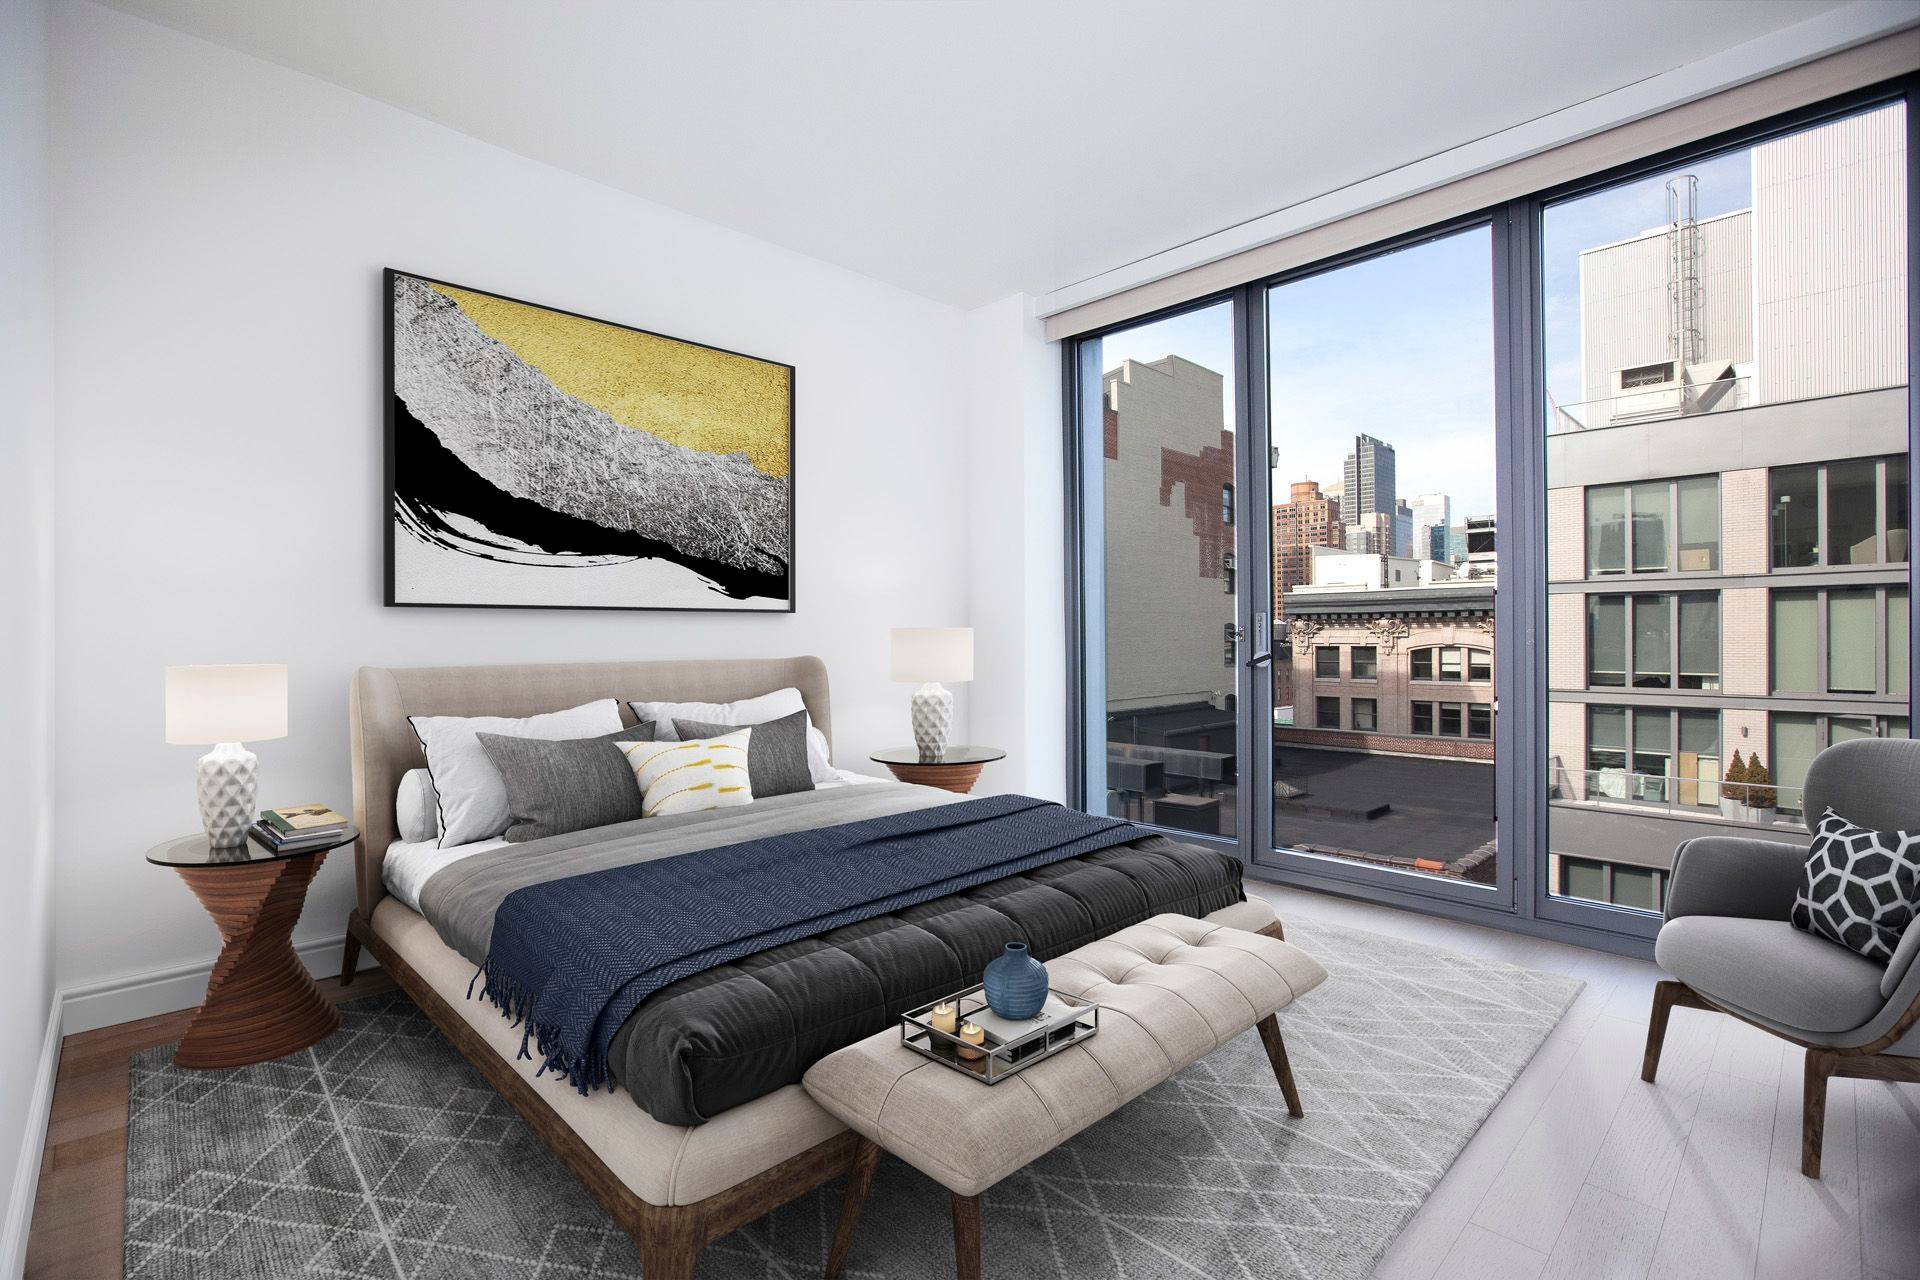 Amidst the lively atmosphere of the historic Flatiron District are brand new residences designed by Morris Adjmi.